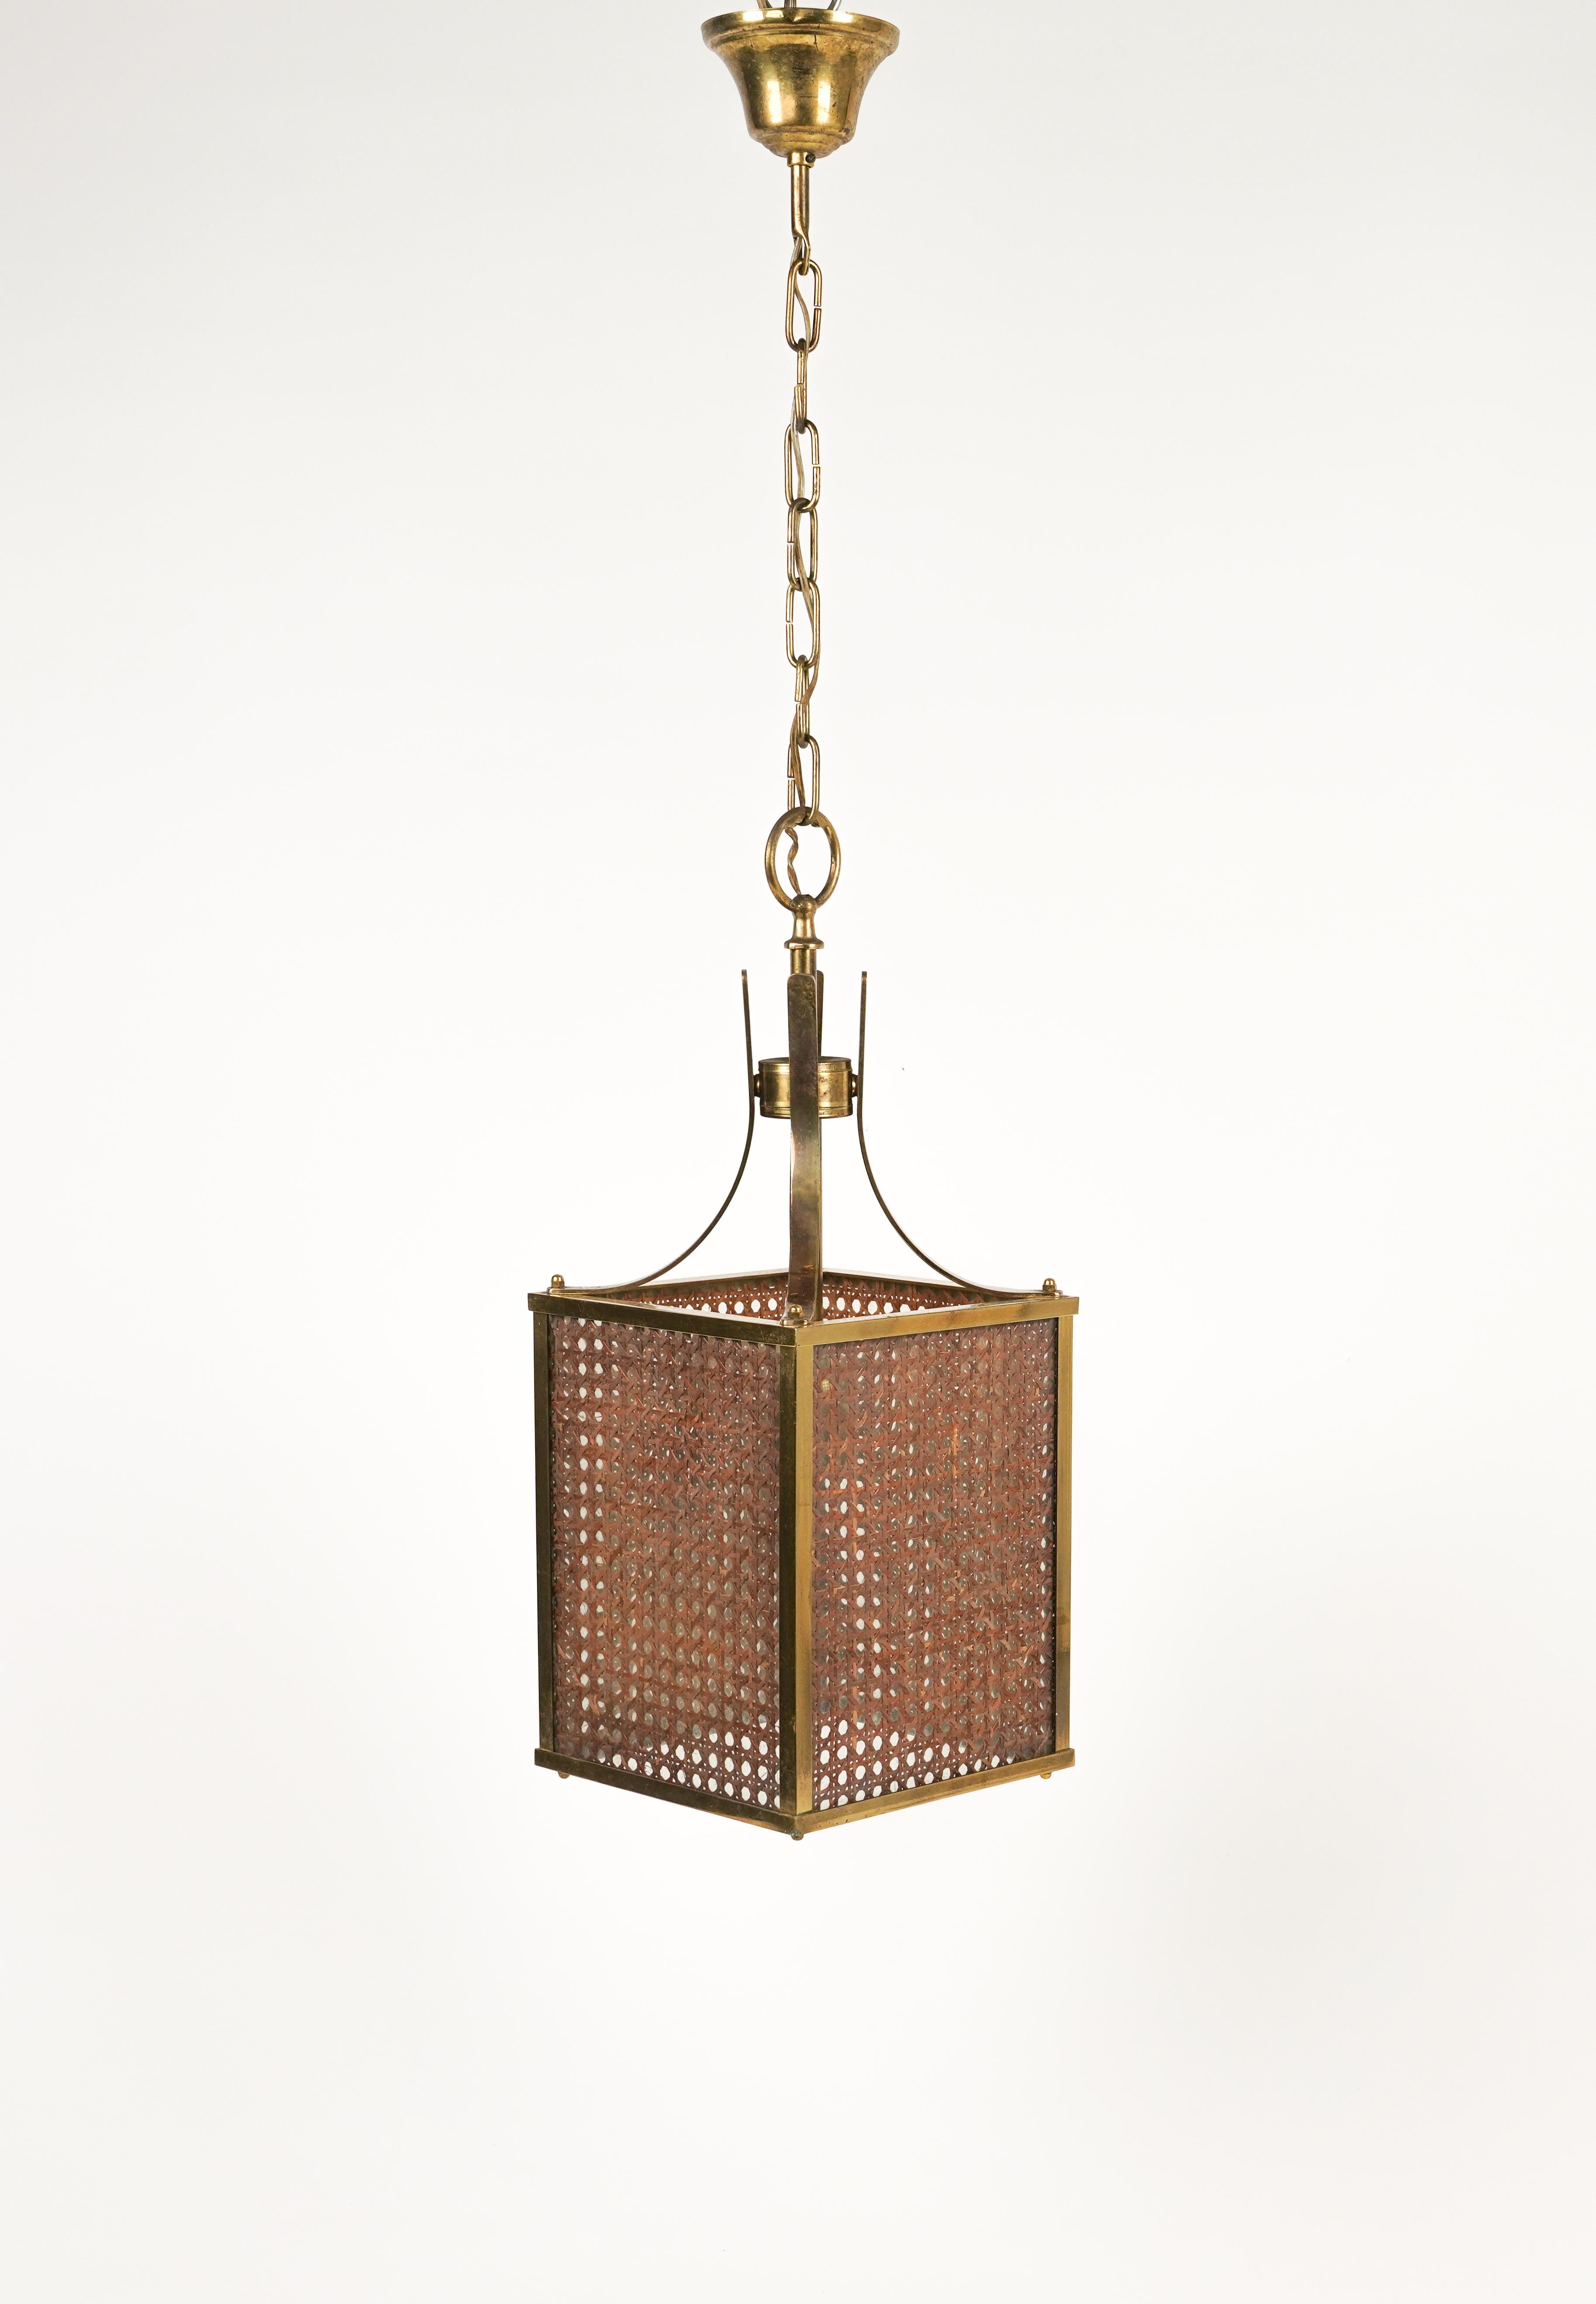 Midcentury Beautiful chandelier lantern in brass, glass and wicker in the style of Romeo Rega.

Made in Italy in the 1970s.